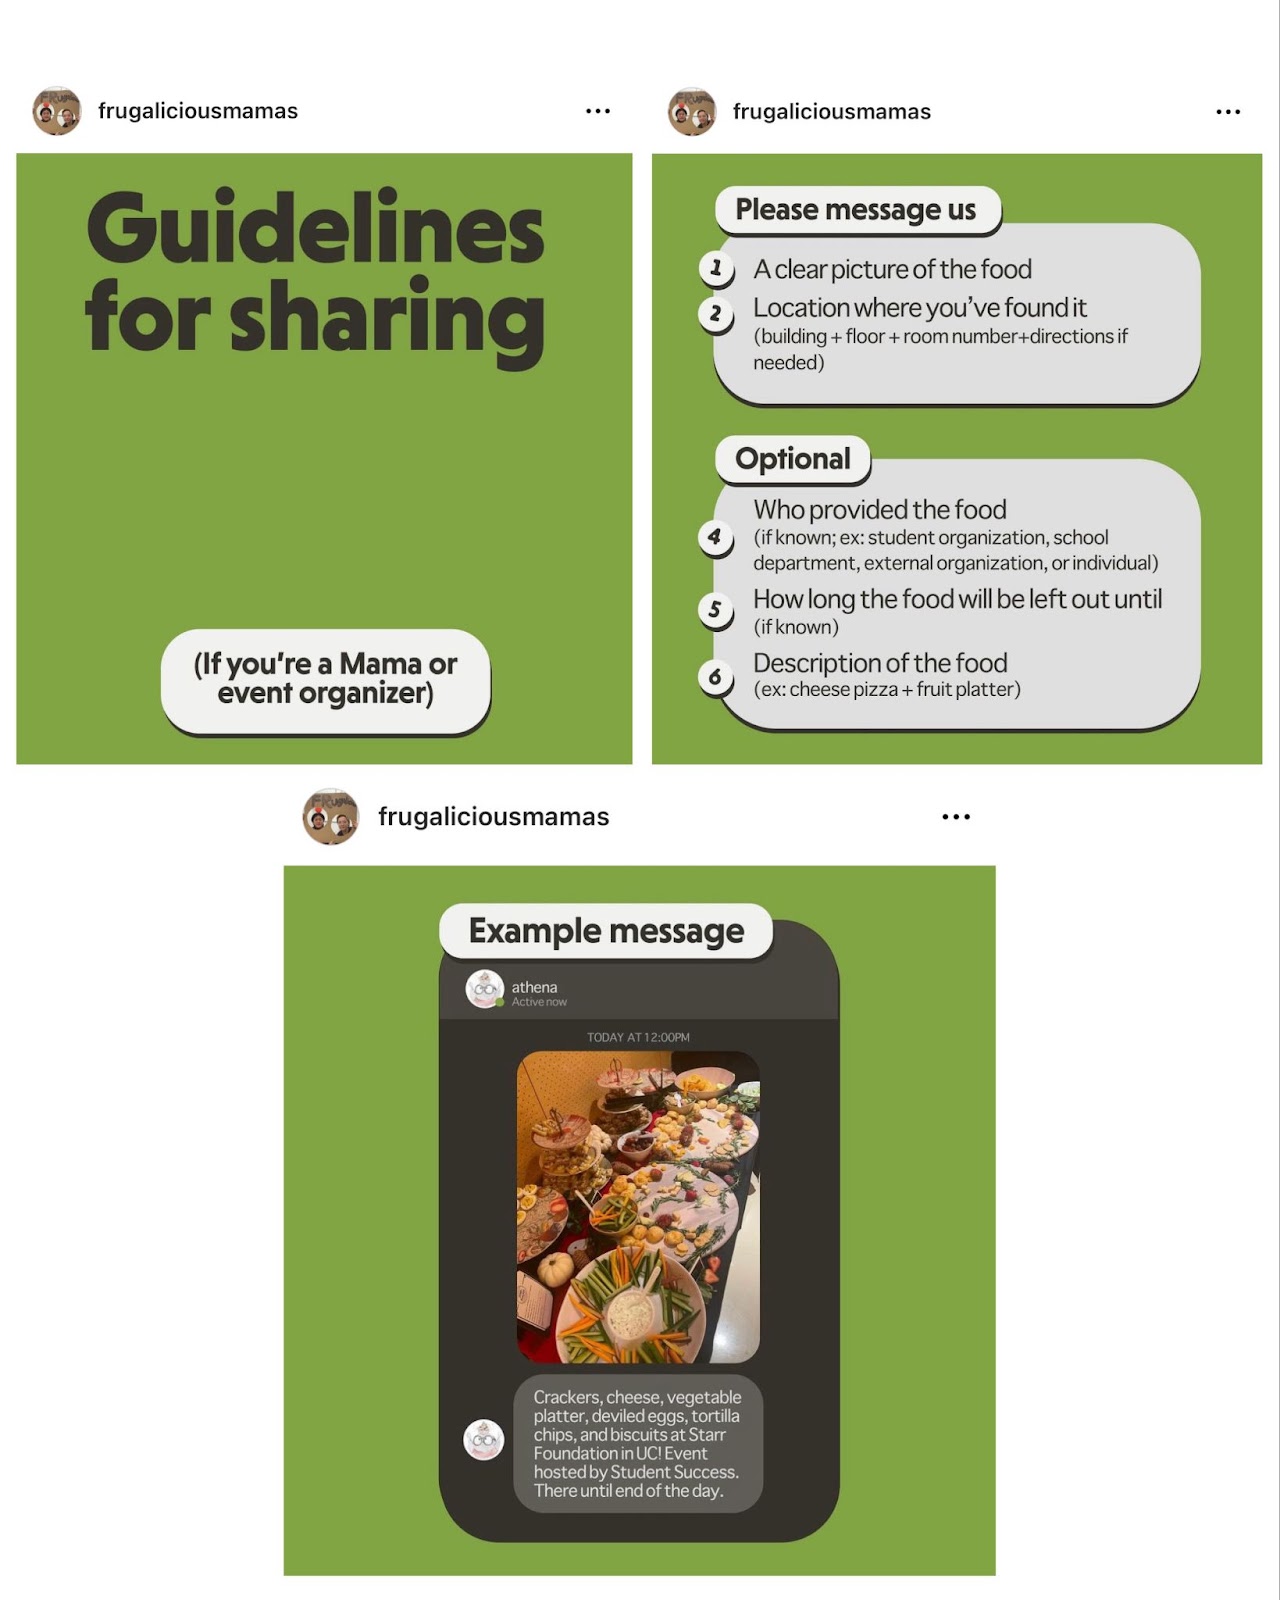 Guidelines from the Frugalicious Mamas Instagram on a green background, that describe how to share where students find free food, and an example of a message to send